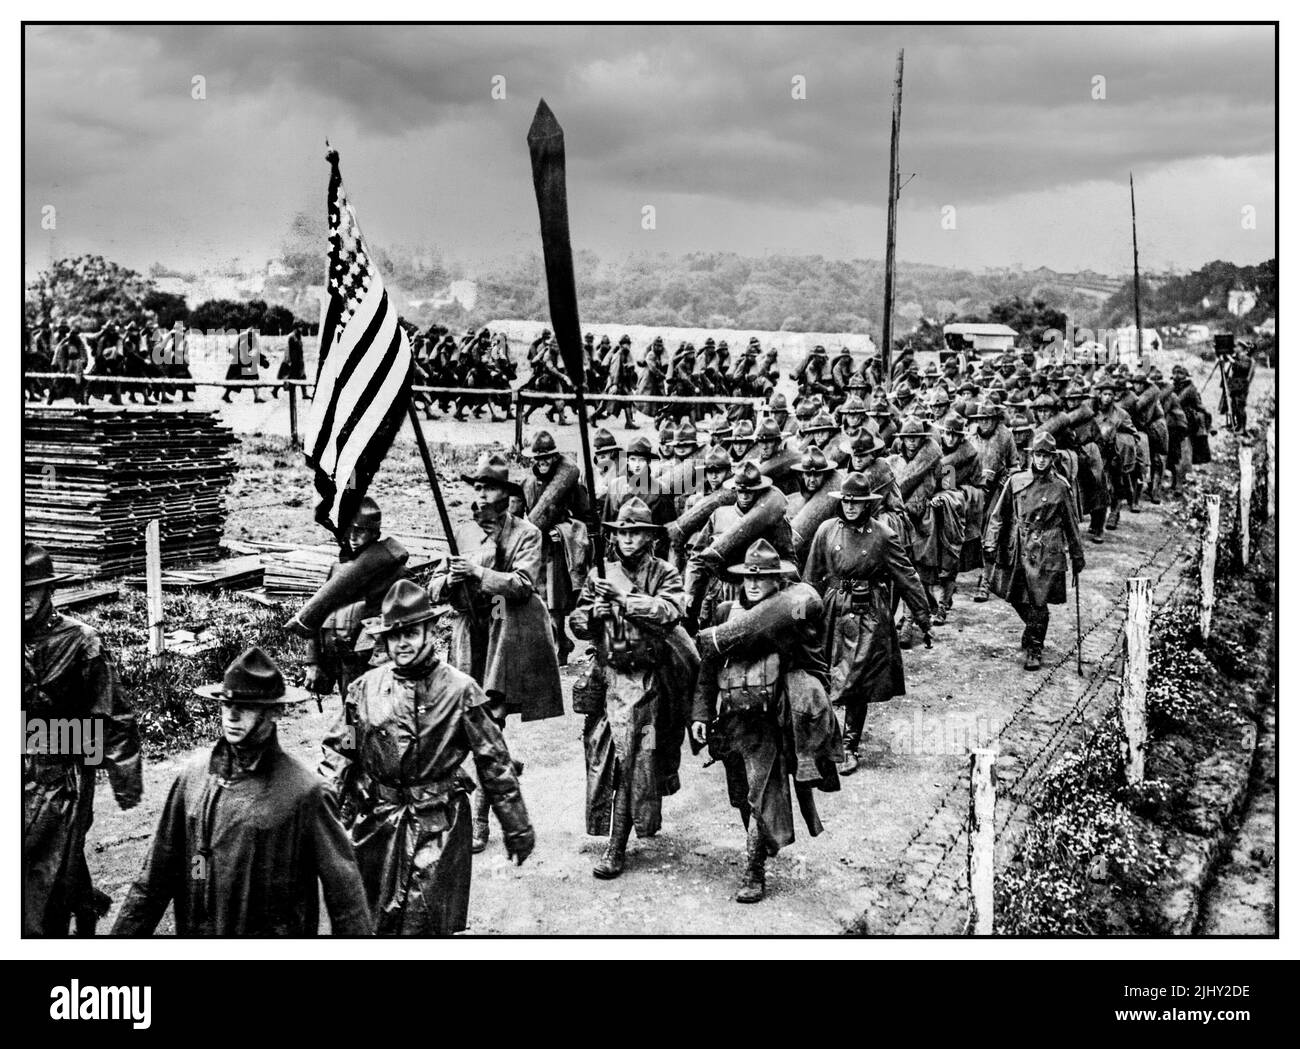 WW1 American Army Troops of the American Army parade at Le Havre, 12 July 1918. marching on to The Western Front in wet weather trench coats 1917-1918 WW1 World War 1 First World War Stock Photo